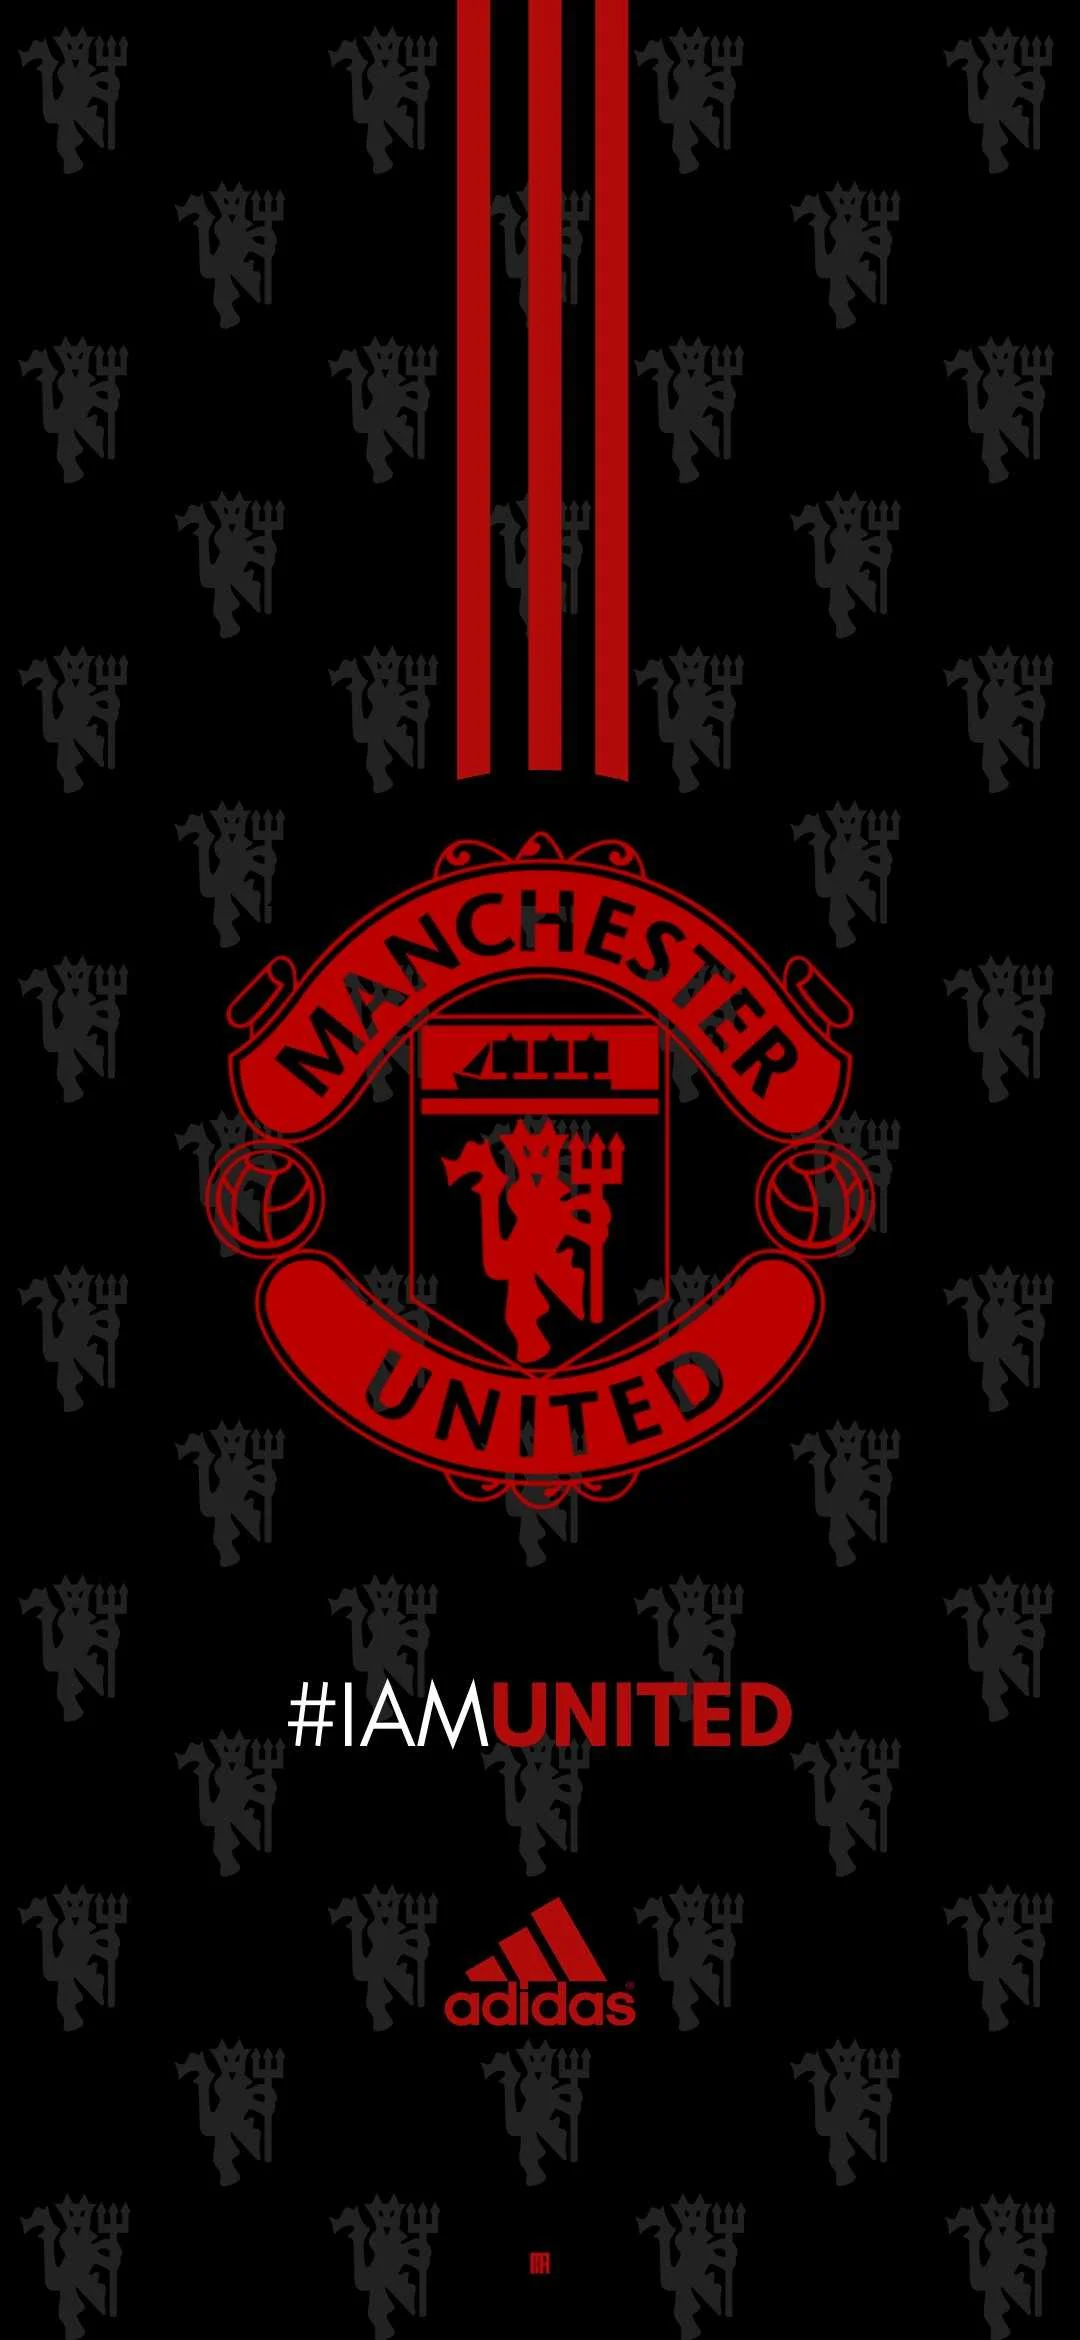 Manchester United: Became the first English team to compete in the European Cup in 1957. 1080x2340 HD Background.